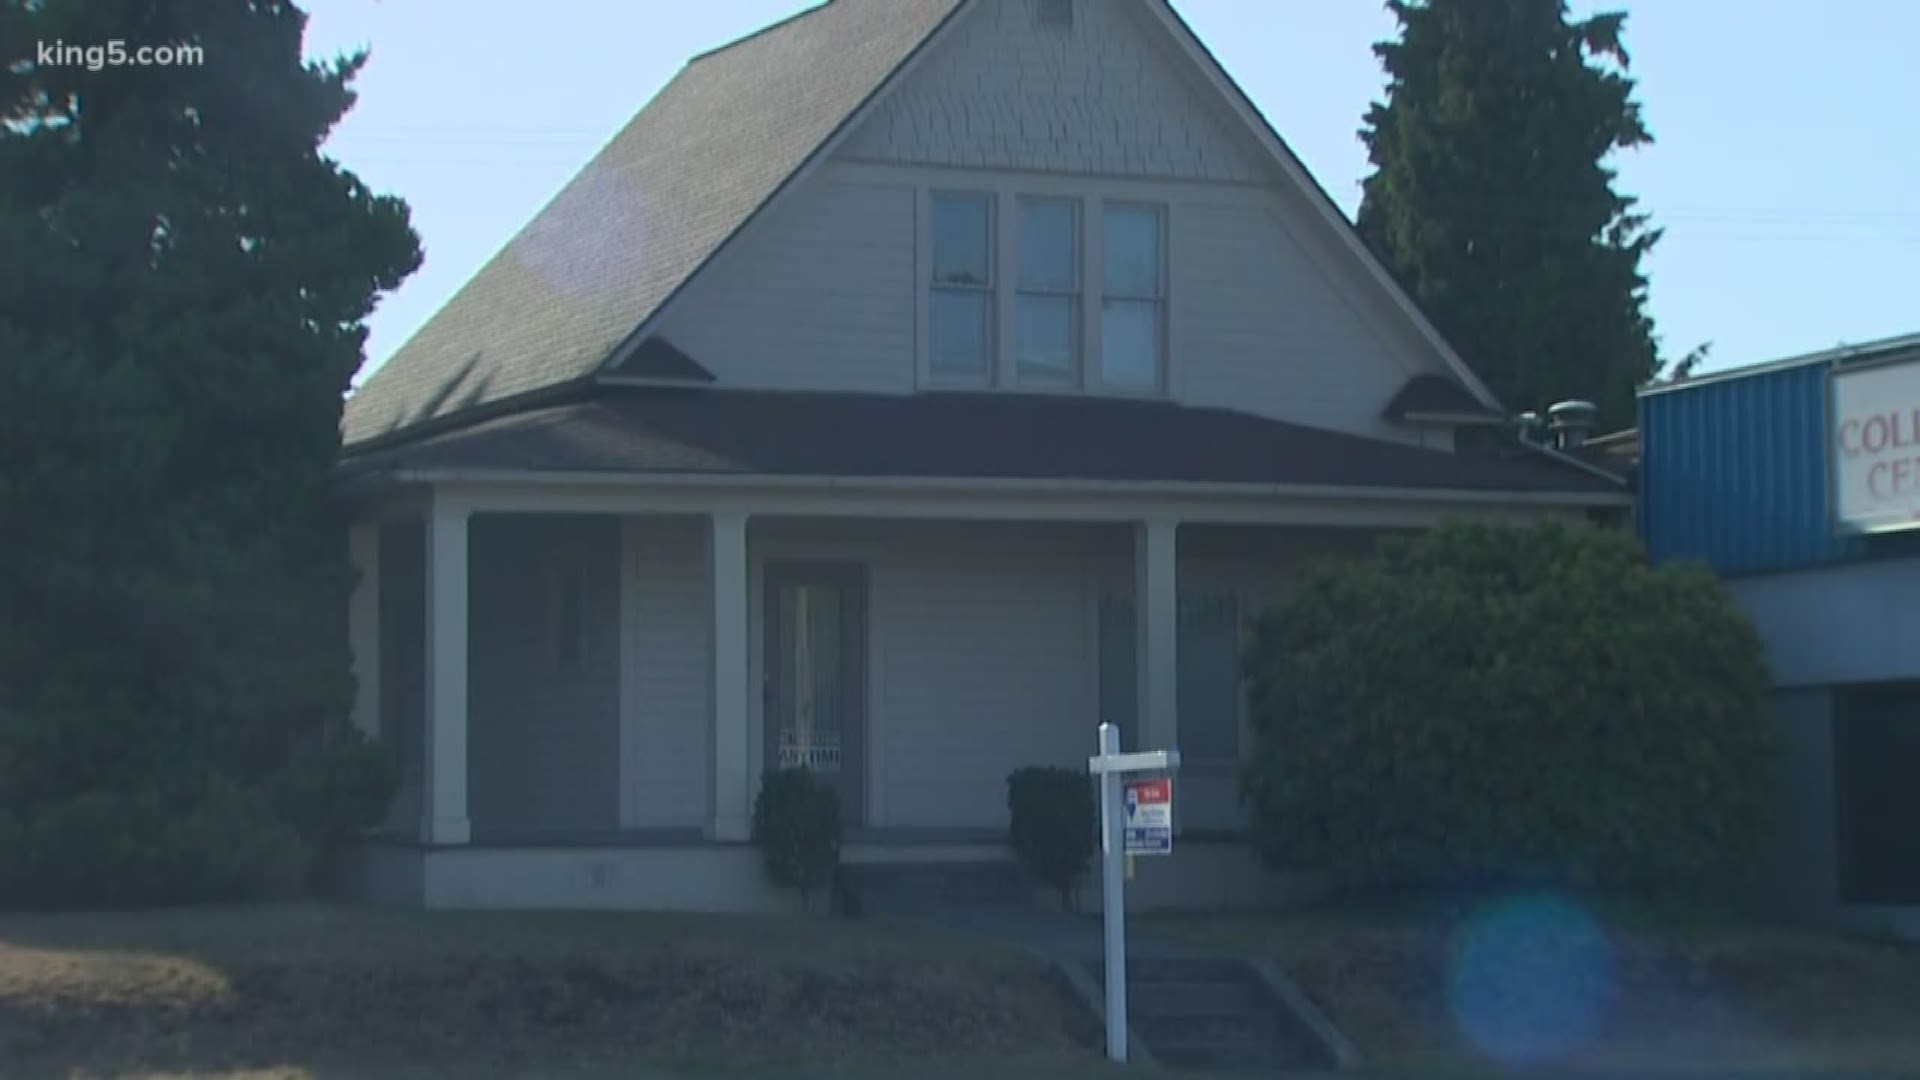 A new survey found that rents are higher in the Everett area than they are in the Seattle area.